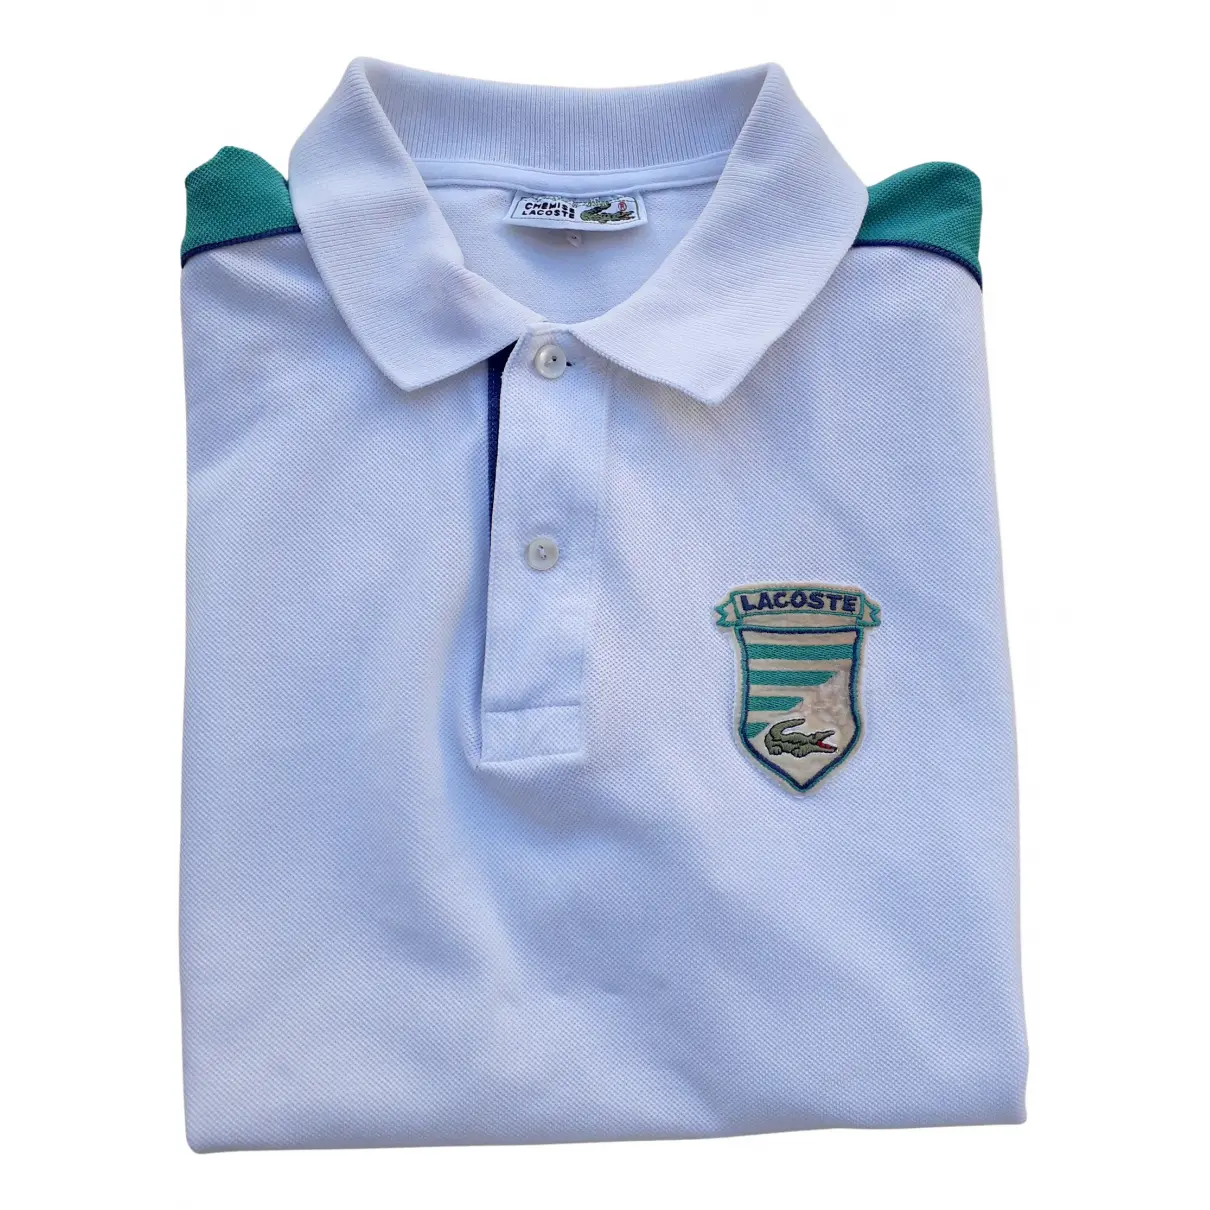 Buy Lacoste Polo shirt online - Vintage